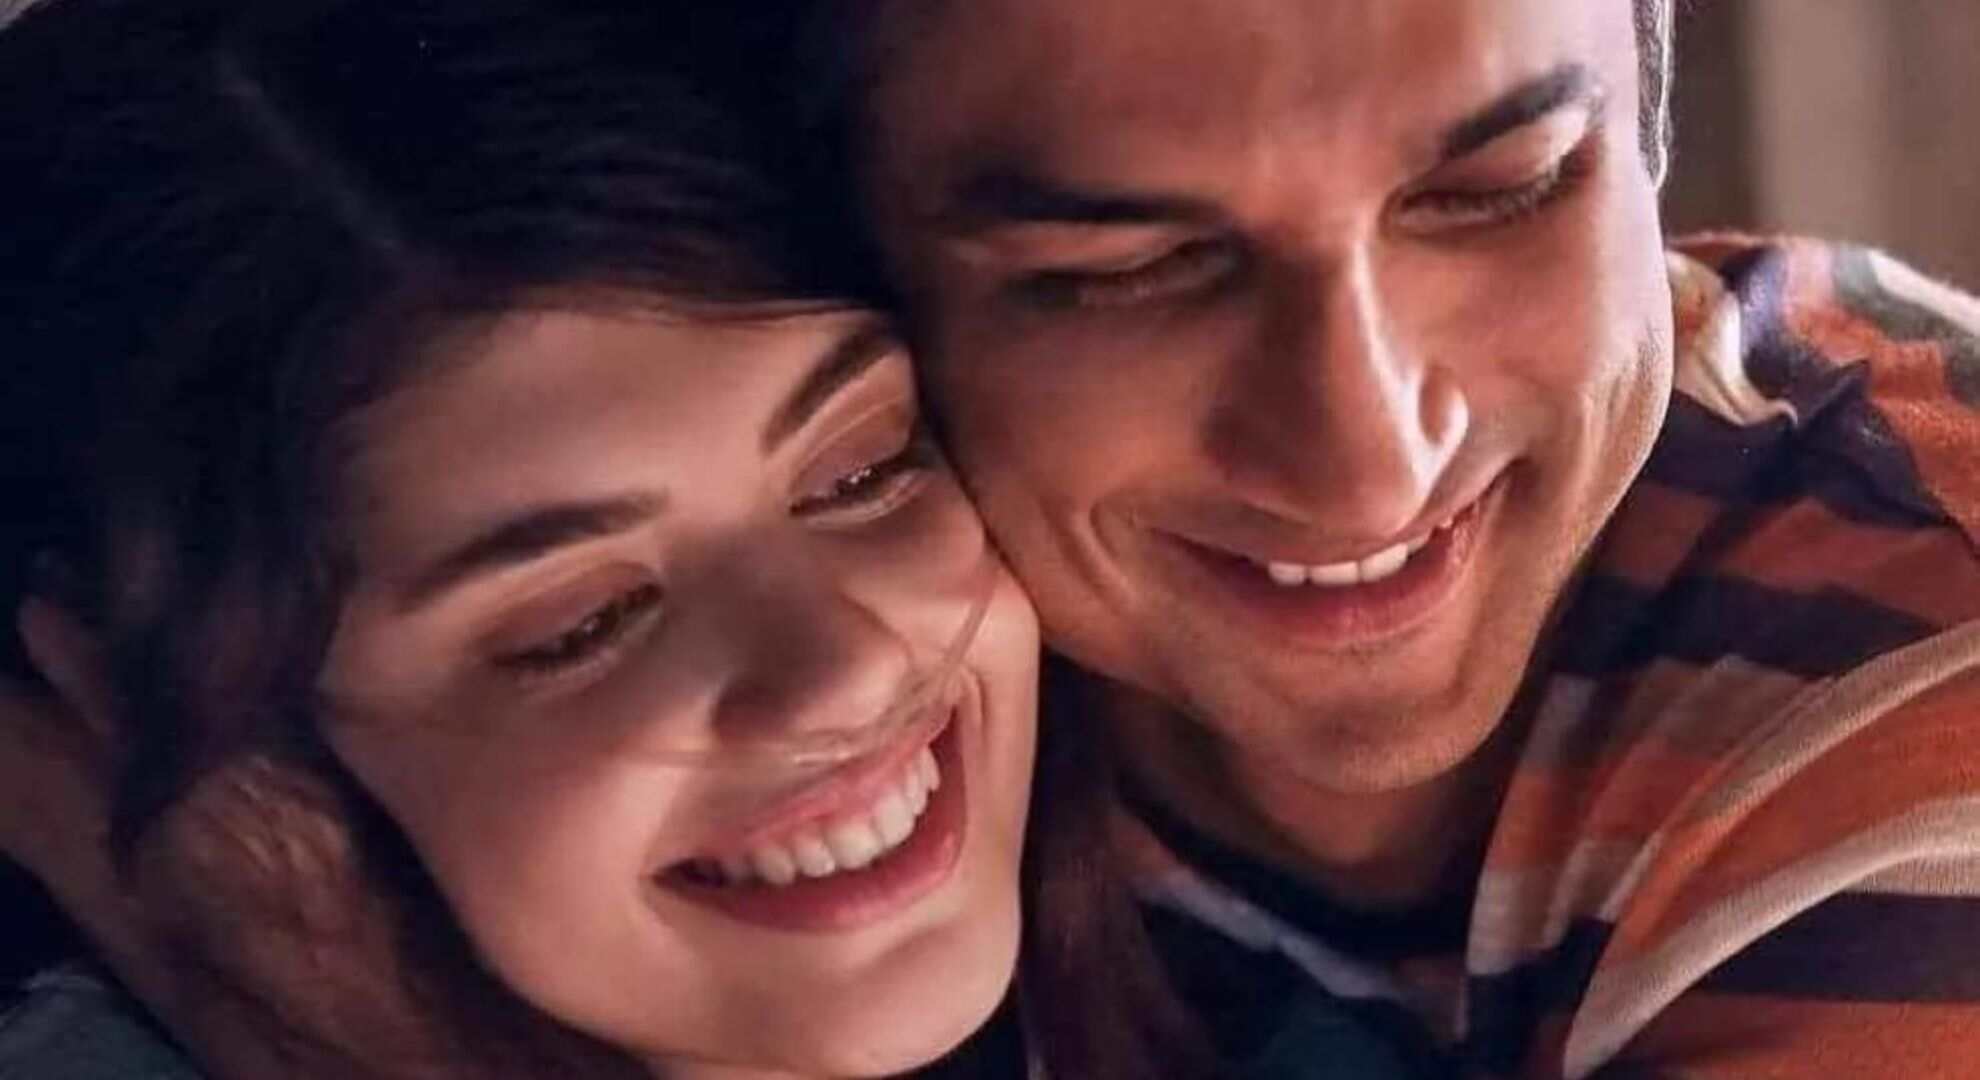 Sanjana Sanghi Reflects on ‘Dil Bechara’ As It Celebrates 4th Anniversary, Pays Tribute To Sushant Singh Rajput